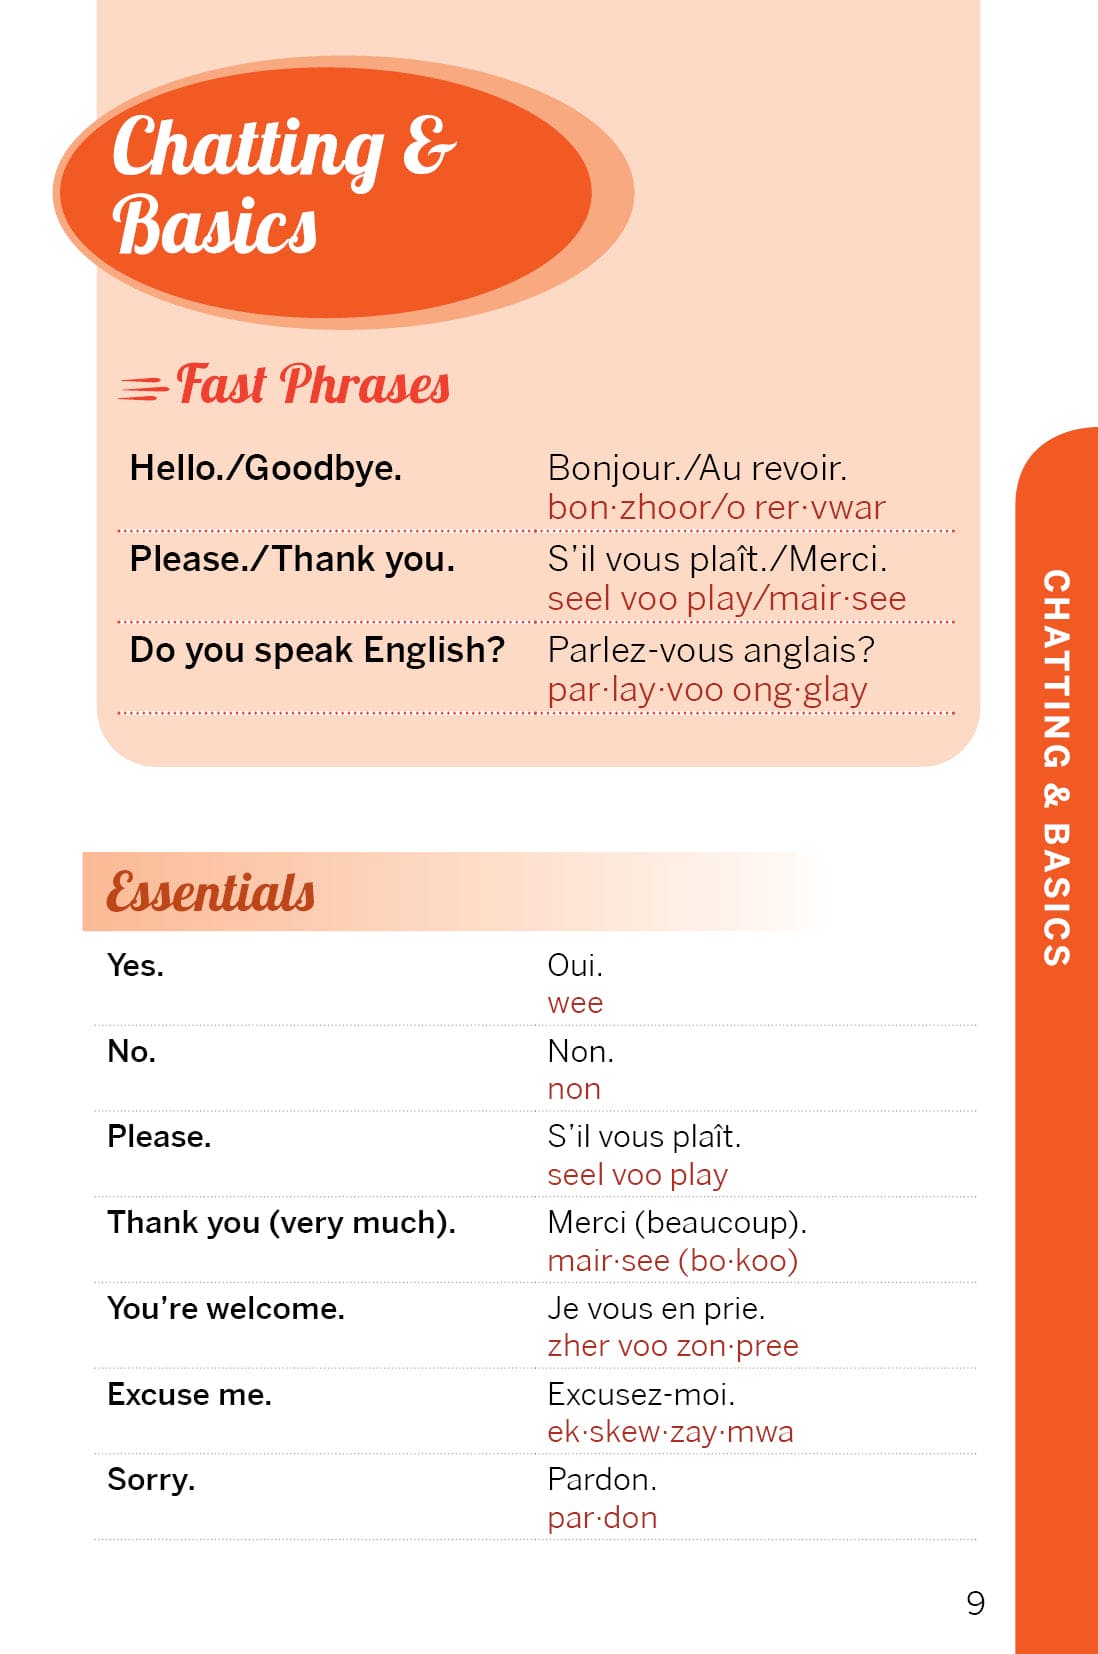 Fast Talk French - Book